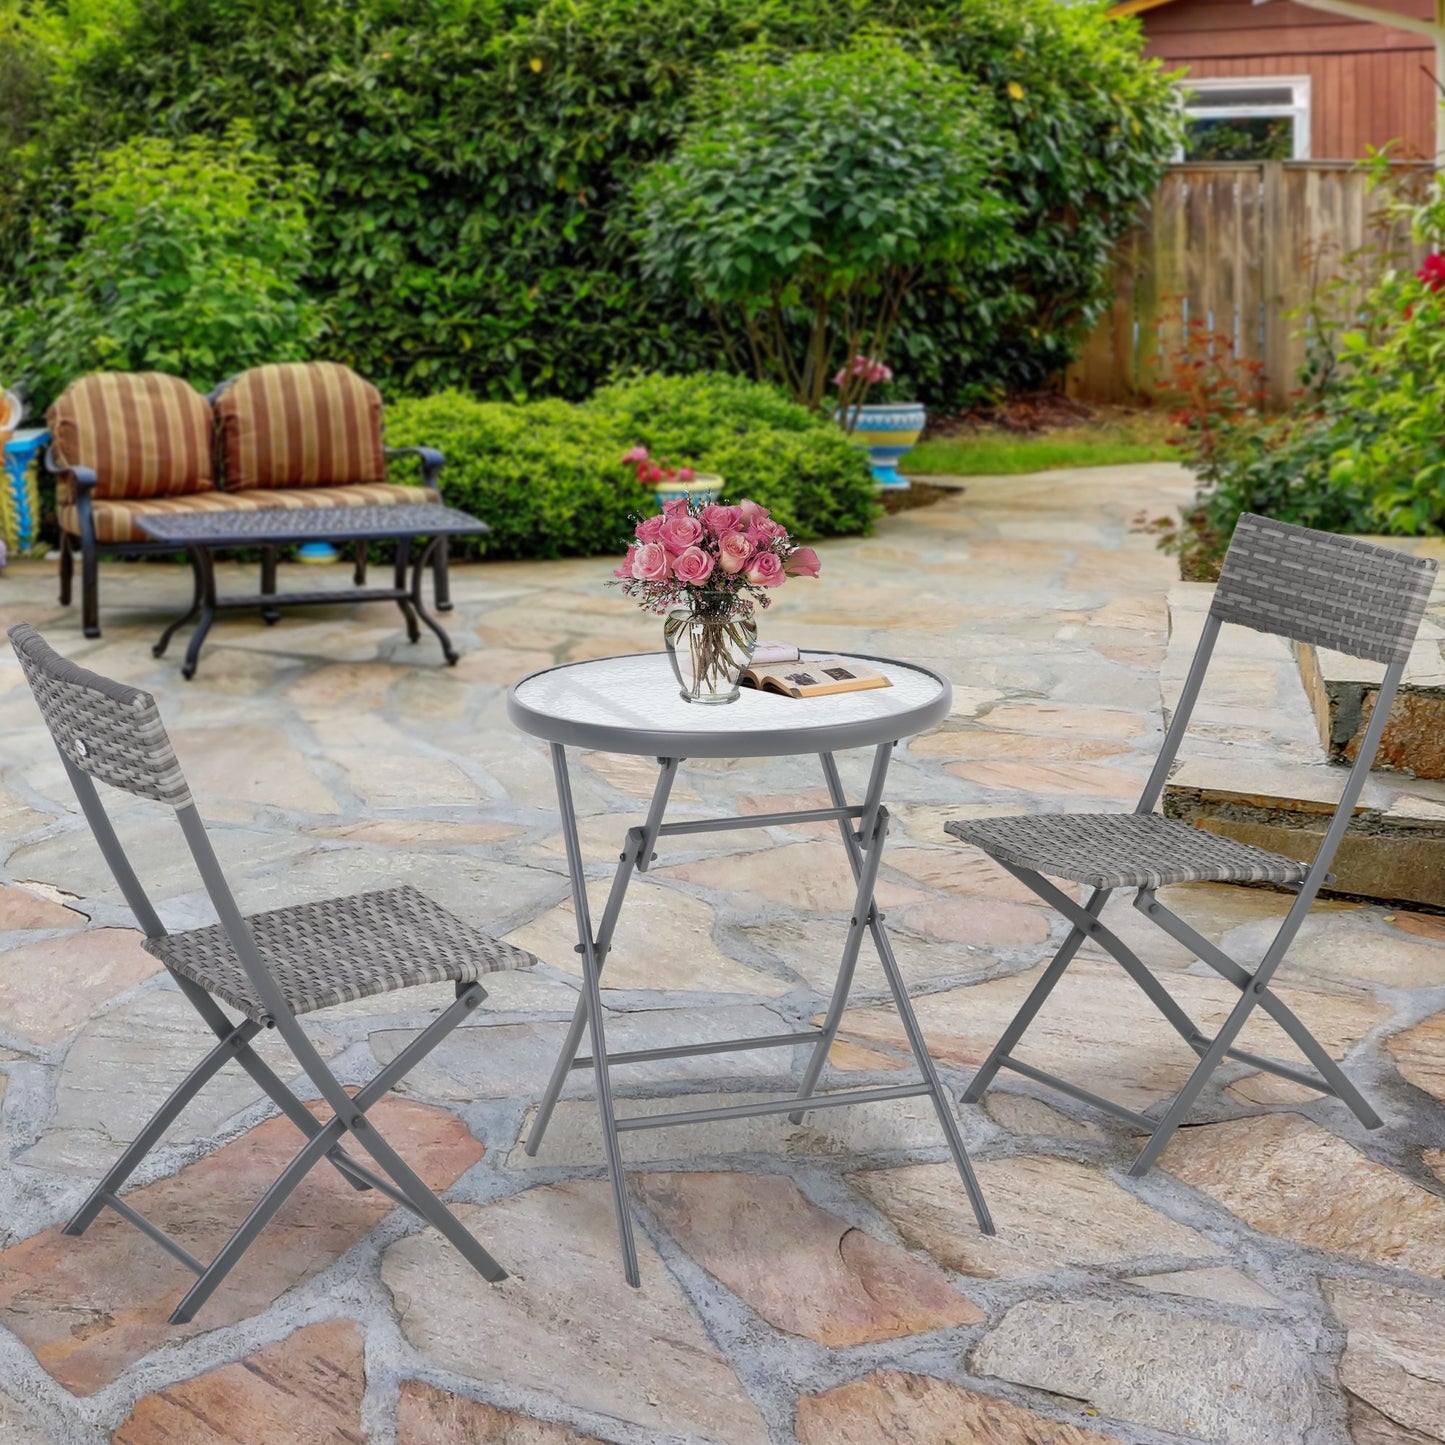 Outsunny 3 PCs Patio Wicker Bistro Set Foldable Table and Chair Set for Outdoor Yard